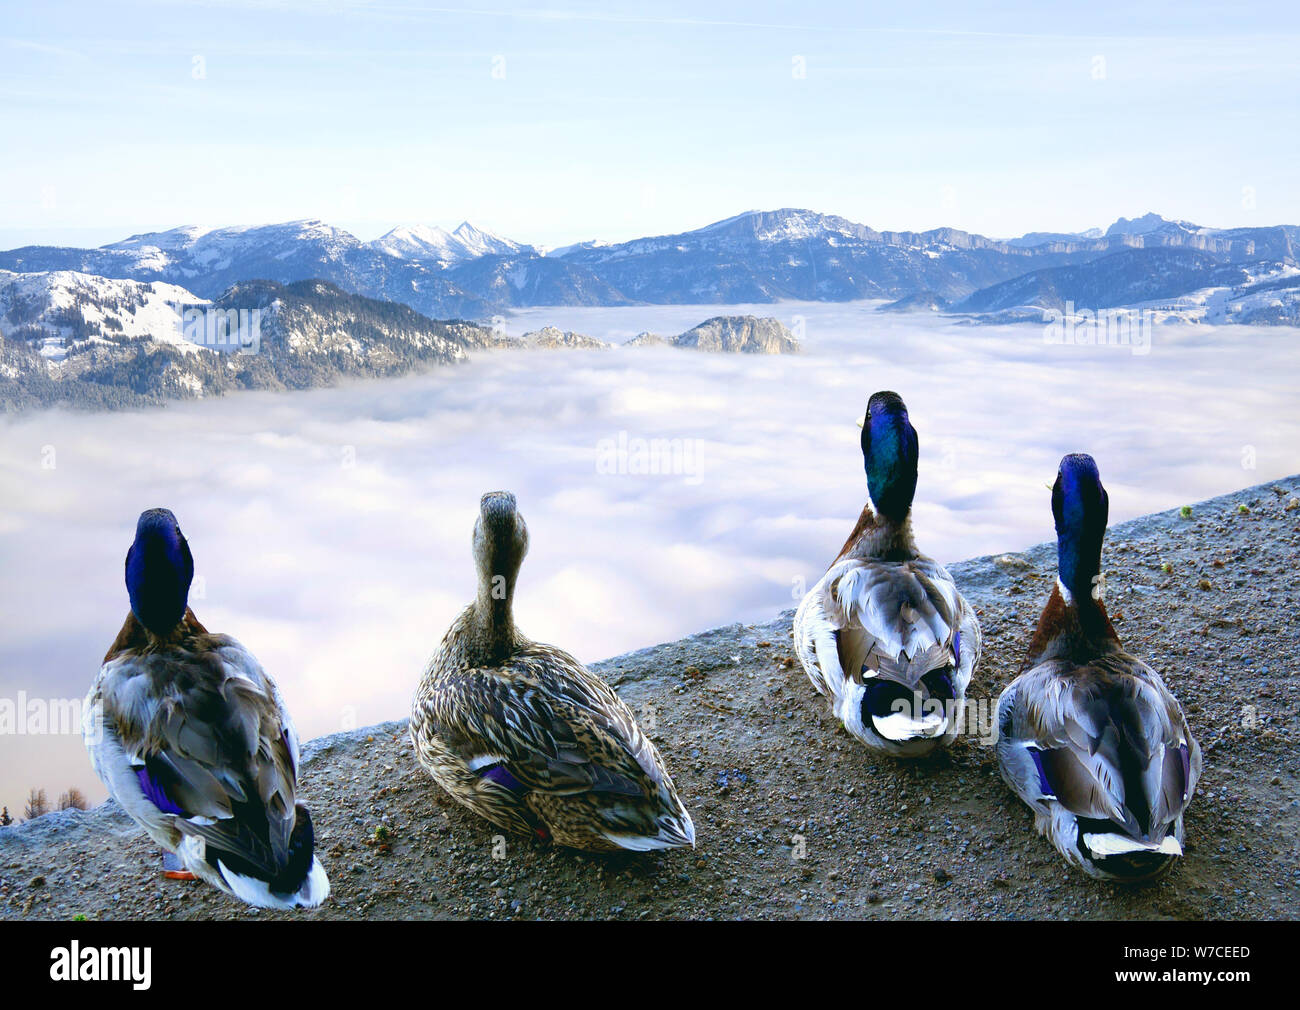 Mallard ducks in a rock cliff staring at distant ice mountains. Stock Photo